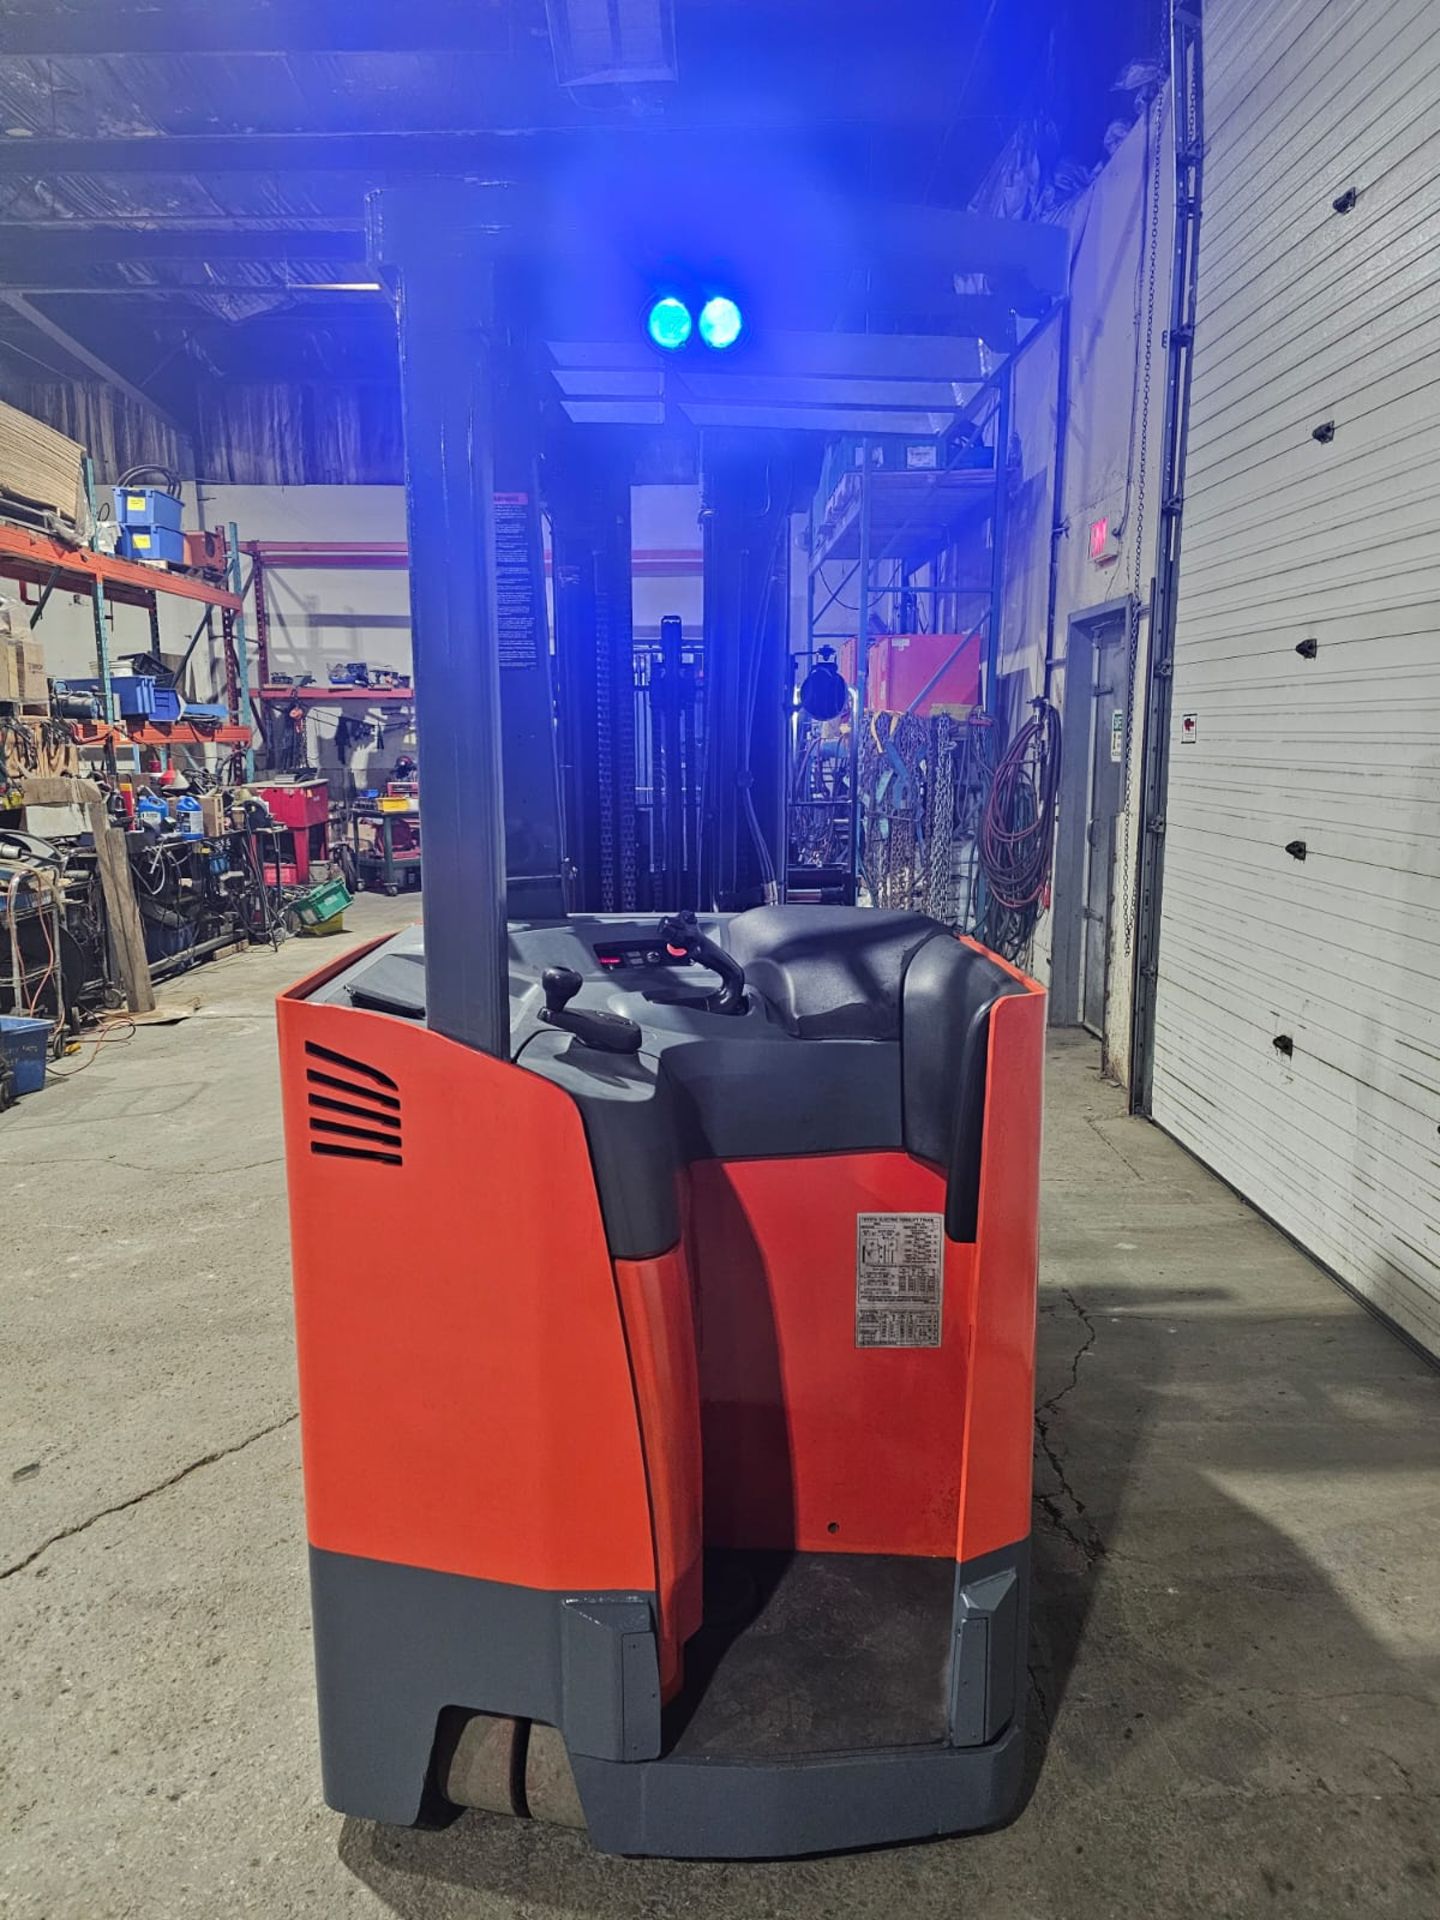 2017 Toyota 4,000lbs Capacity Electric Forklift with 4-STAGE Mast, 276" load height sideshift, 36V - Image 4 of 7